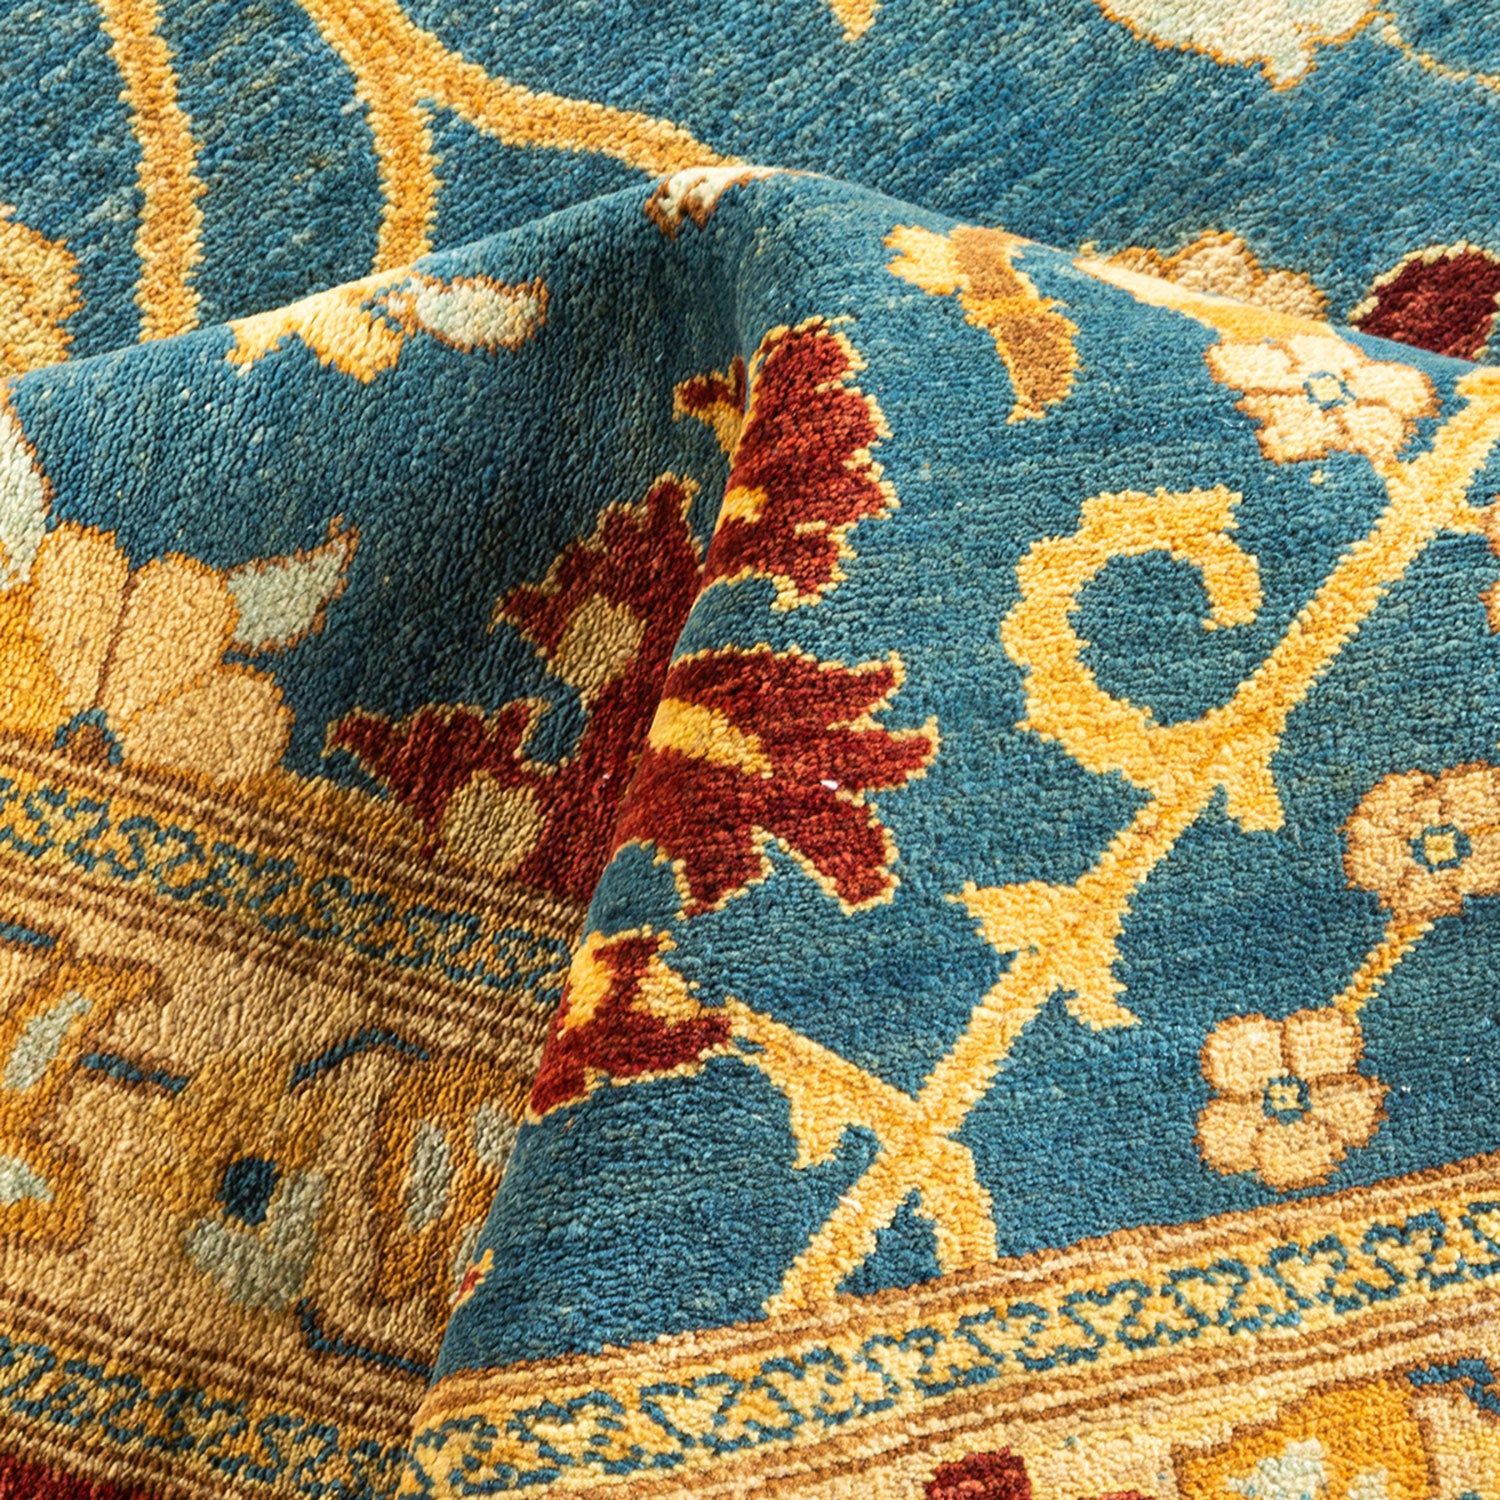 Close-up of textured fabric showcasing intricate floral rug pattern